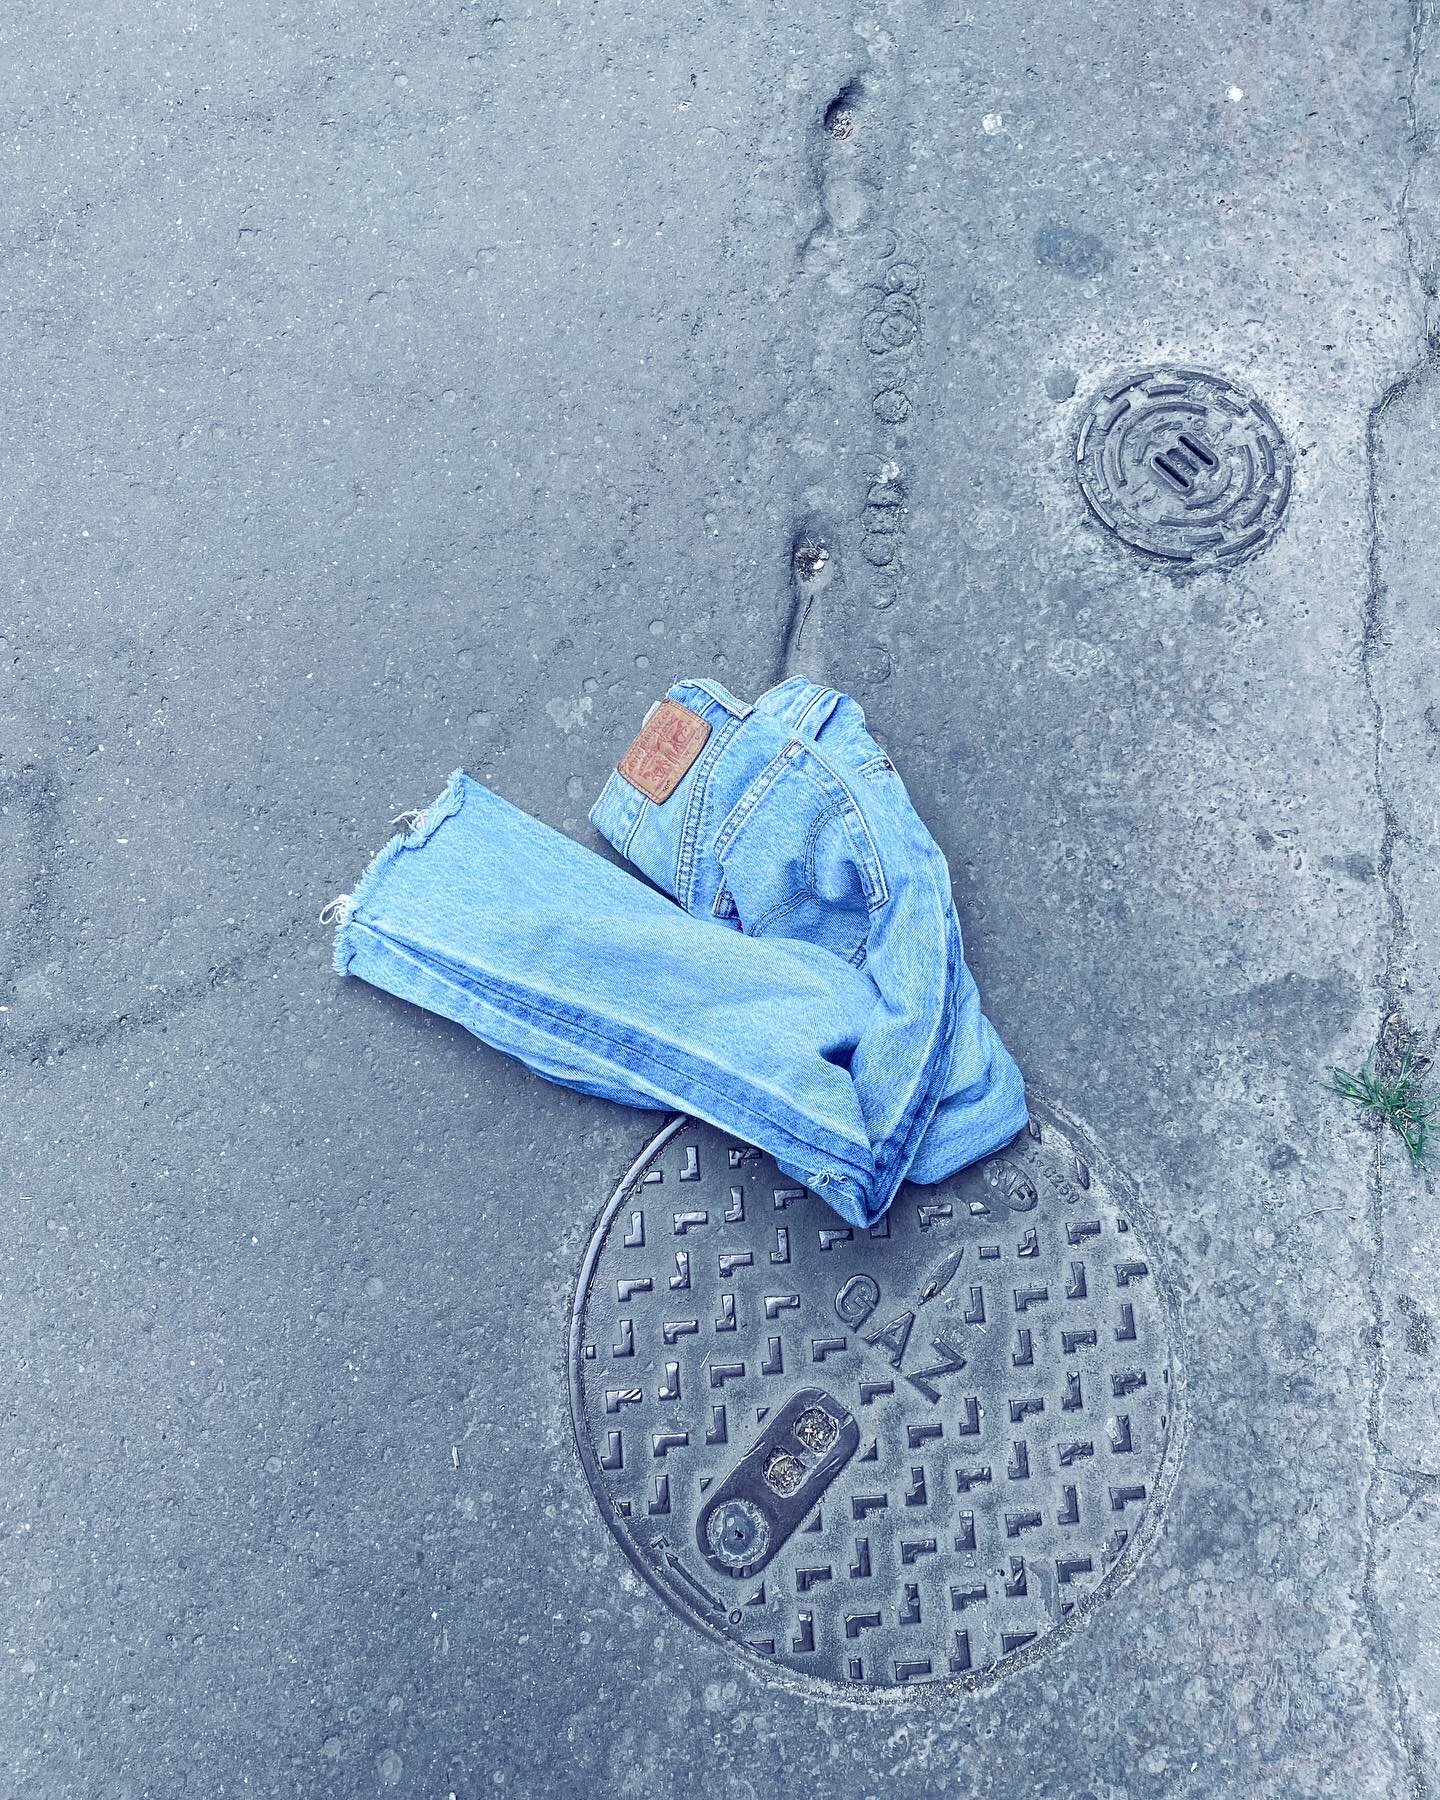 ! BLUE VERITY

I saw your transparency .
Dive me up to your verity .
Call me by your energy .

#bluejean #lostinthecity #whosepants #vintage #streetwear #levis501 #streetphotography #streetlife 

#beauty #lightness #simplicity